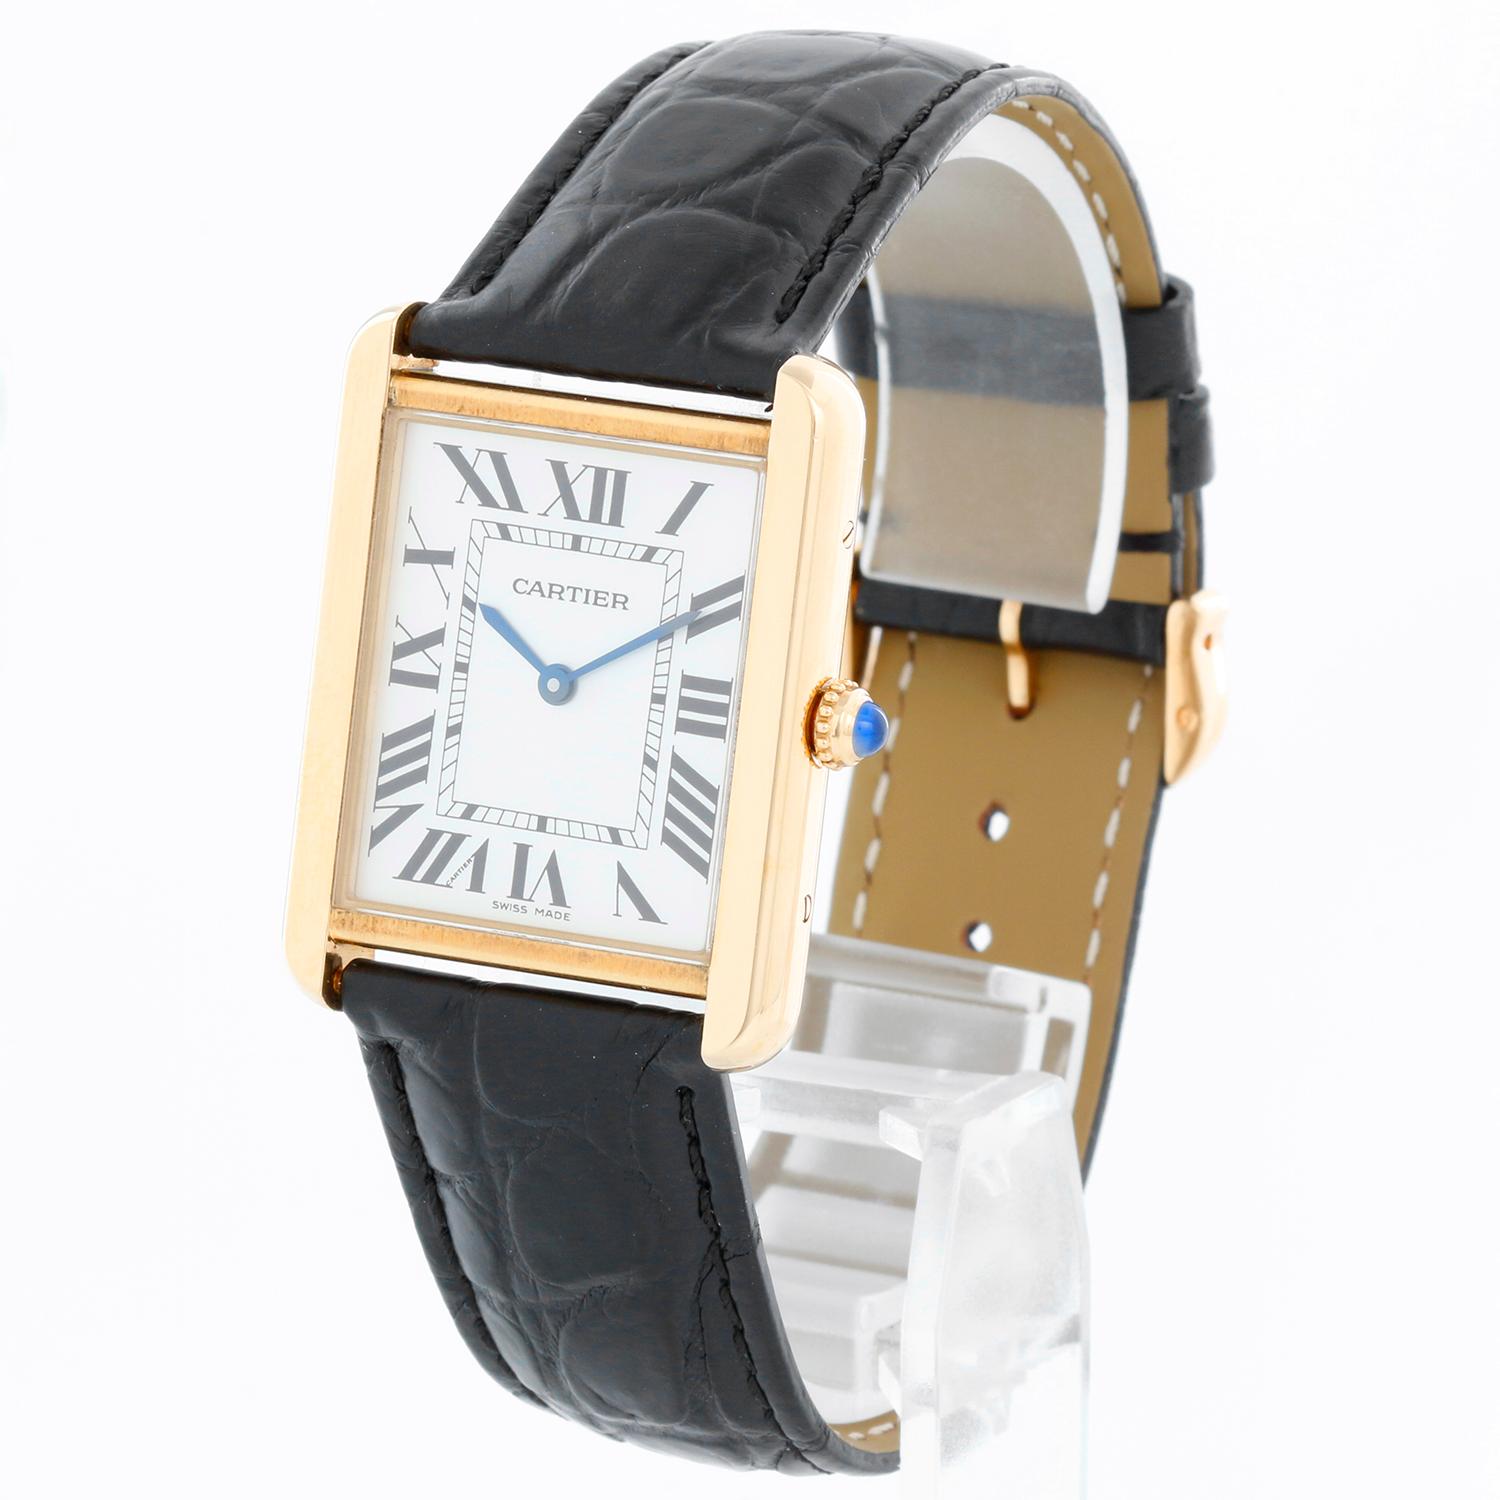 Cartier Tank Solo 18K Yellow Gold Men's Watch W1018855 2742 - Quartz movement. 18k yellow gold case with stainless steel back (27mm x 34mm). Silver colored dial with black Roman numerals. Black Cartier strap band with 18k yellow gold Cartier buckle.